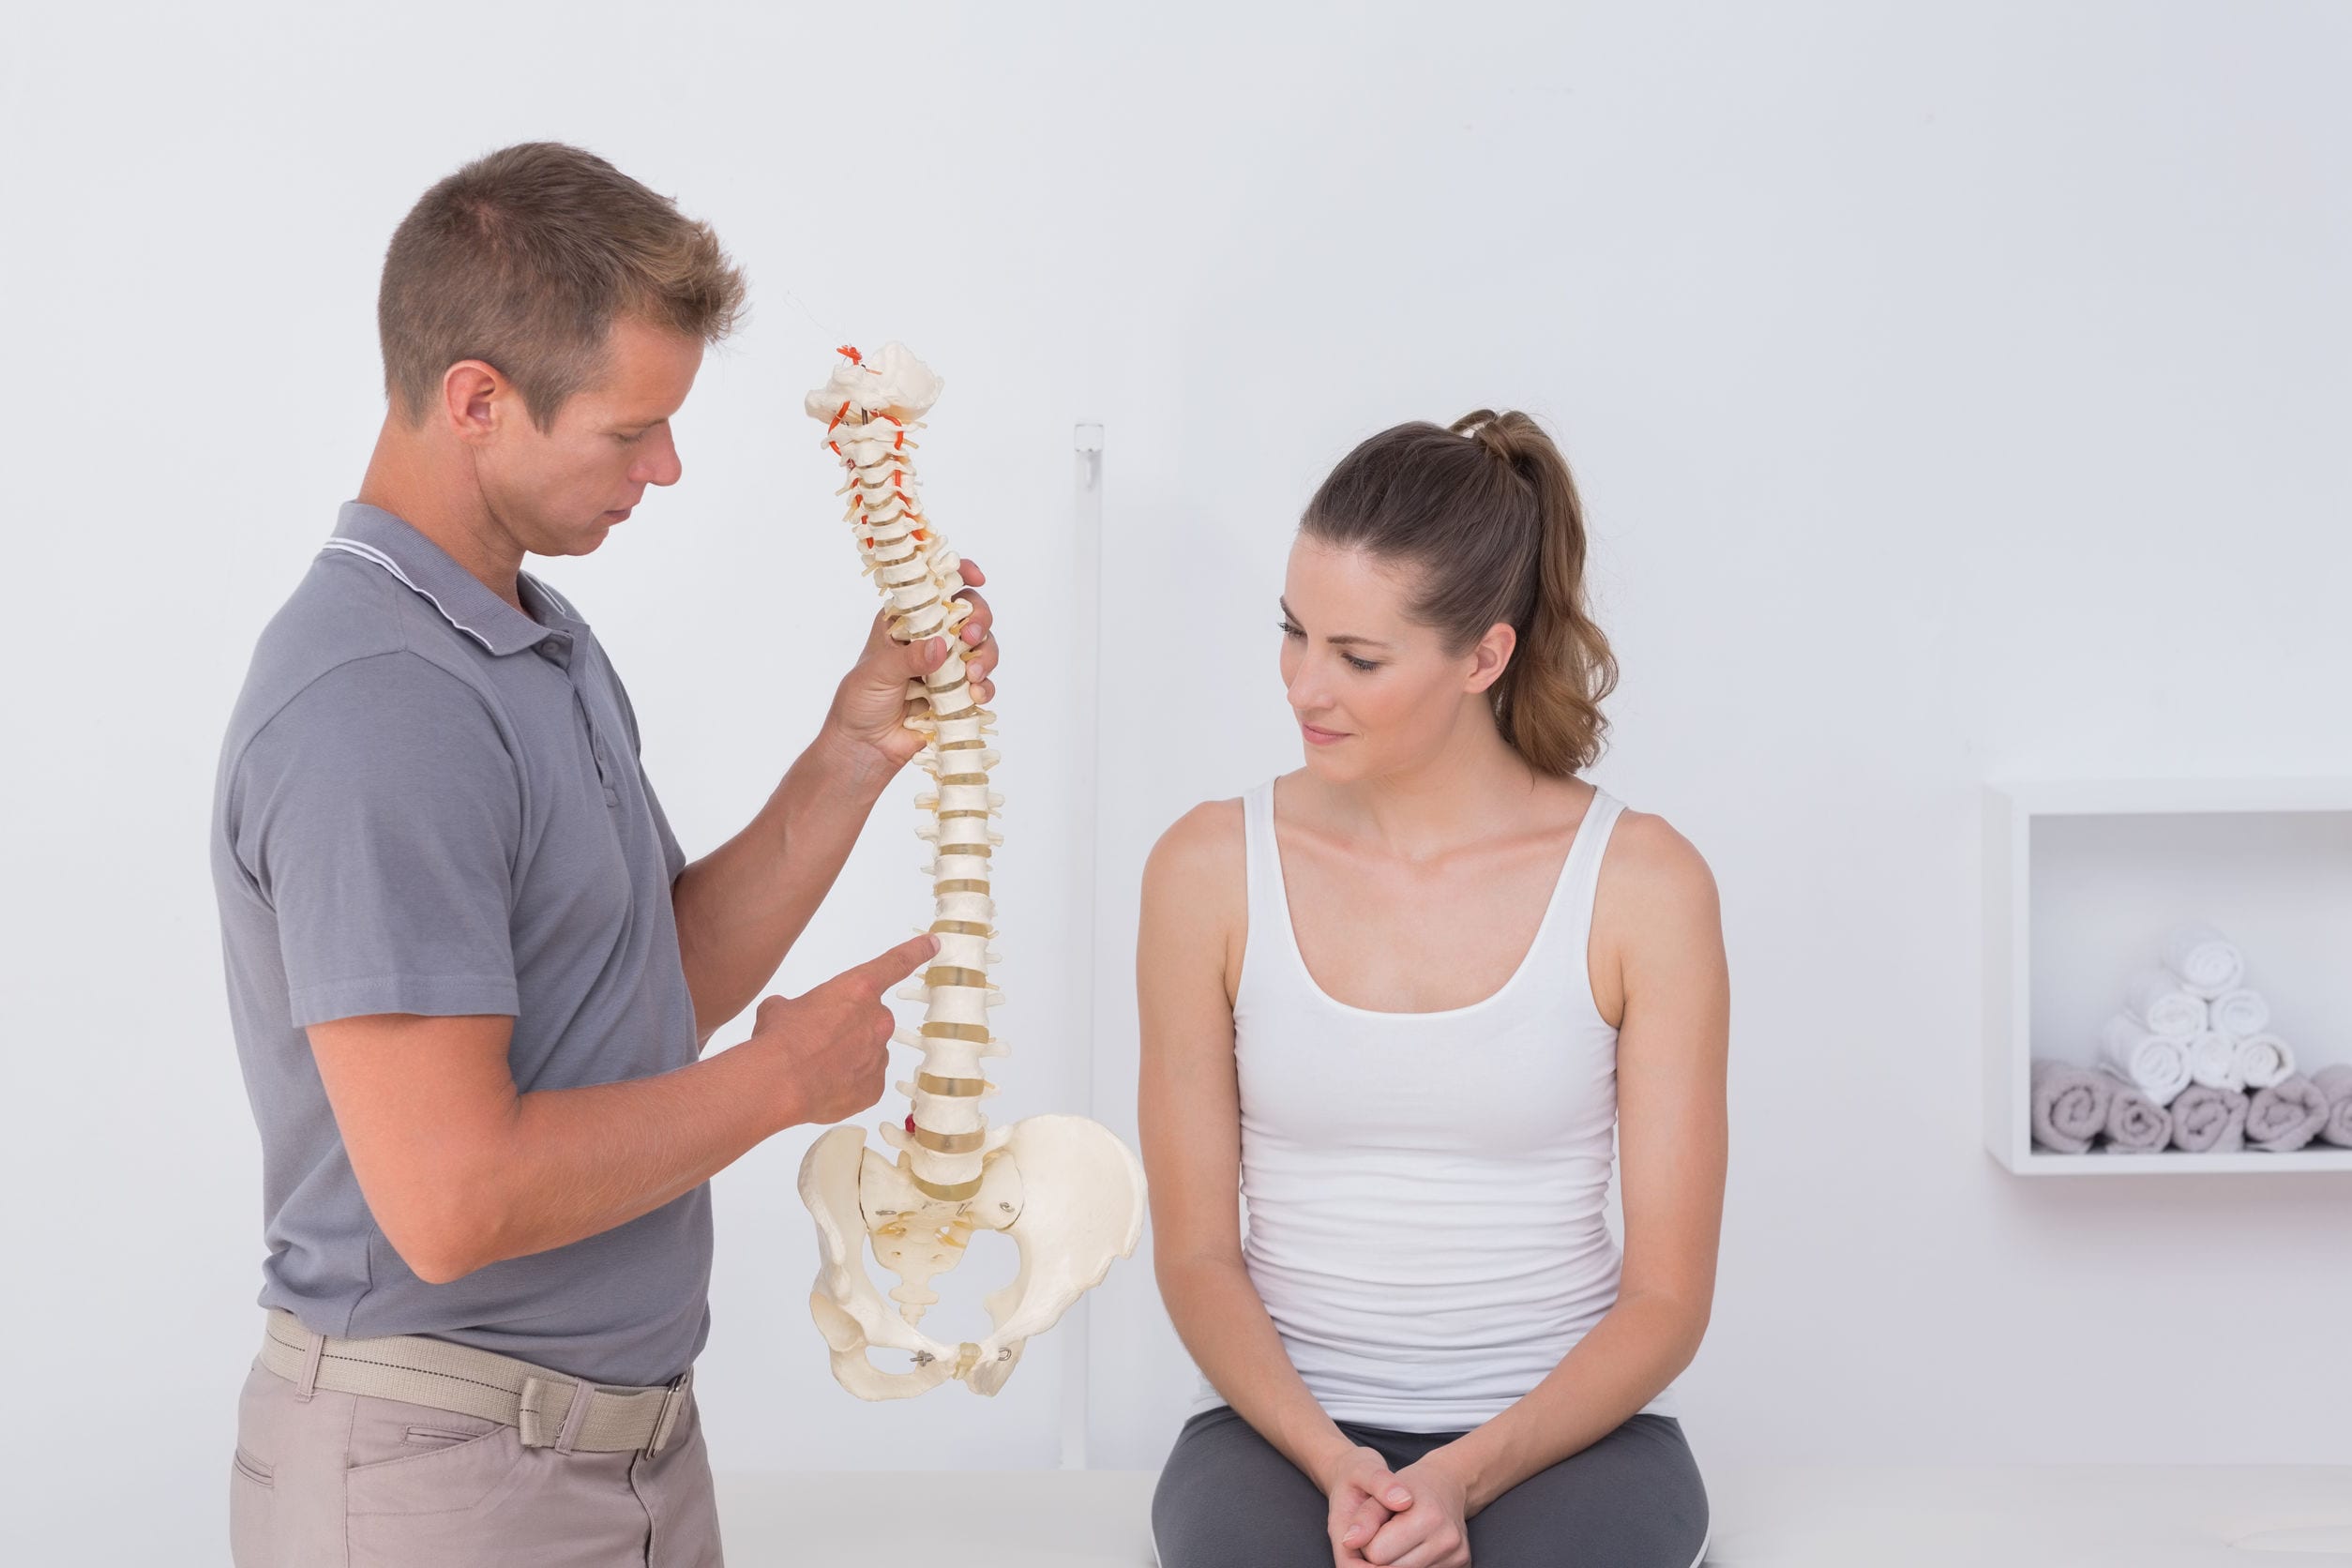 First Time Going to a Chiropractor? FAQs to Ask